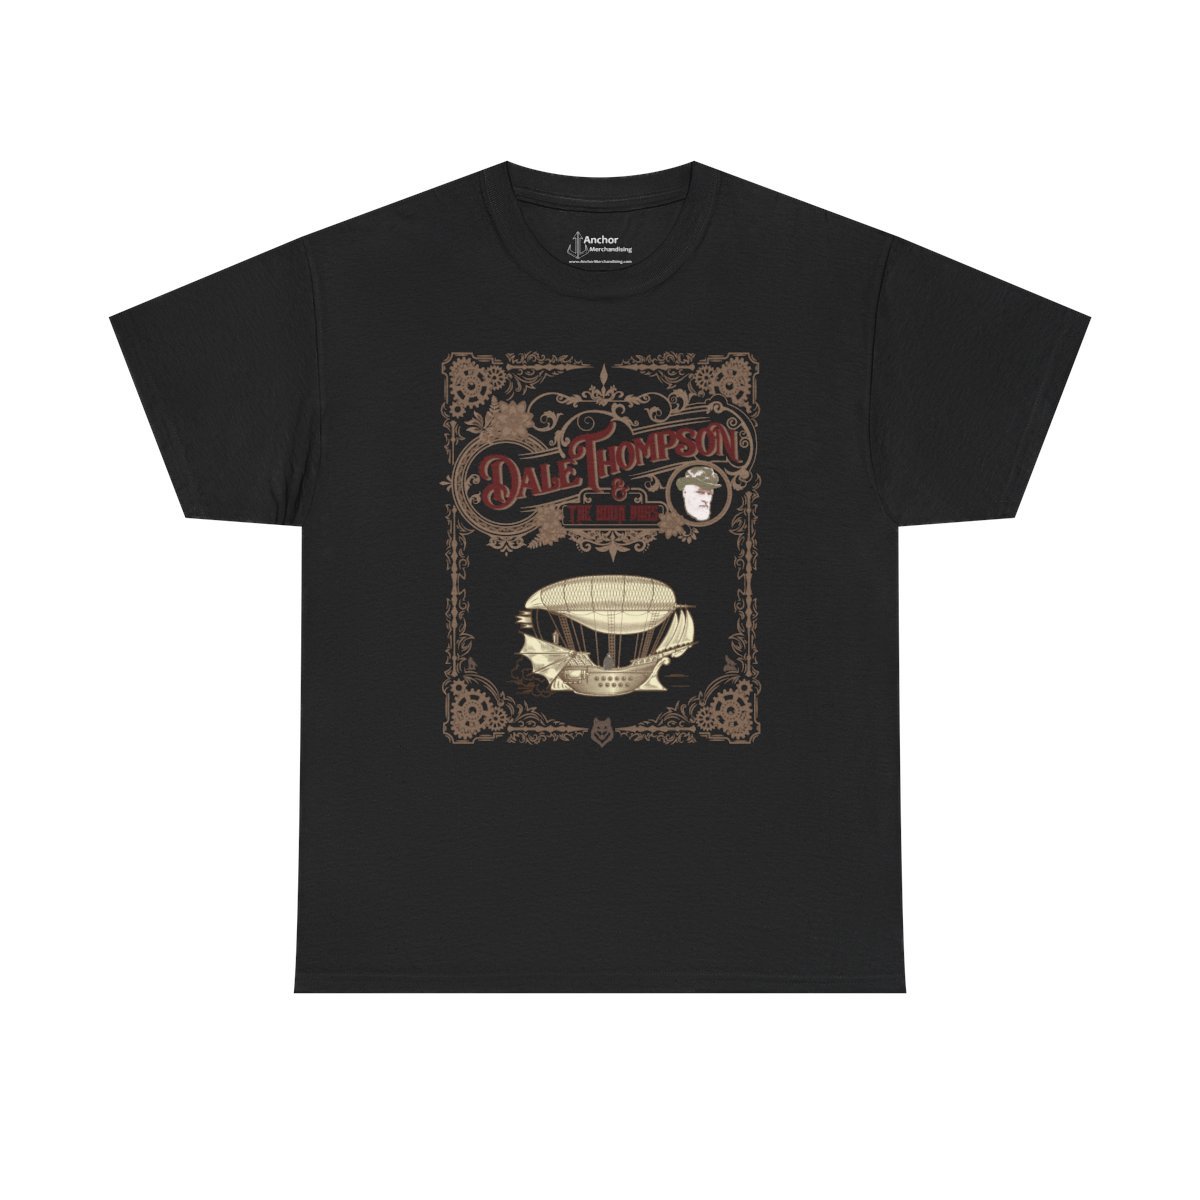 Dale Thompson and the Boon Dogs Short Sleeve Tshirt